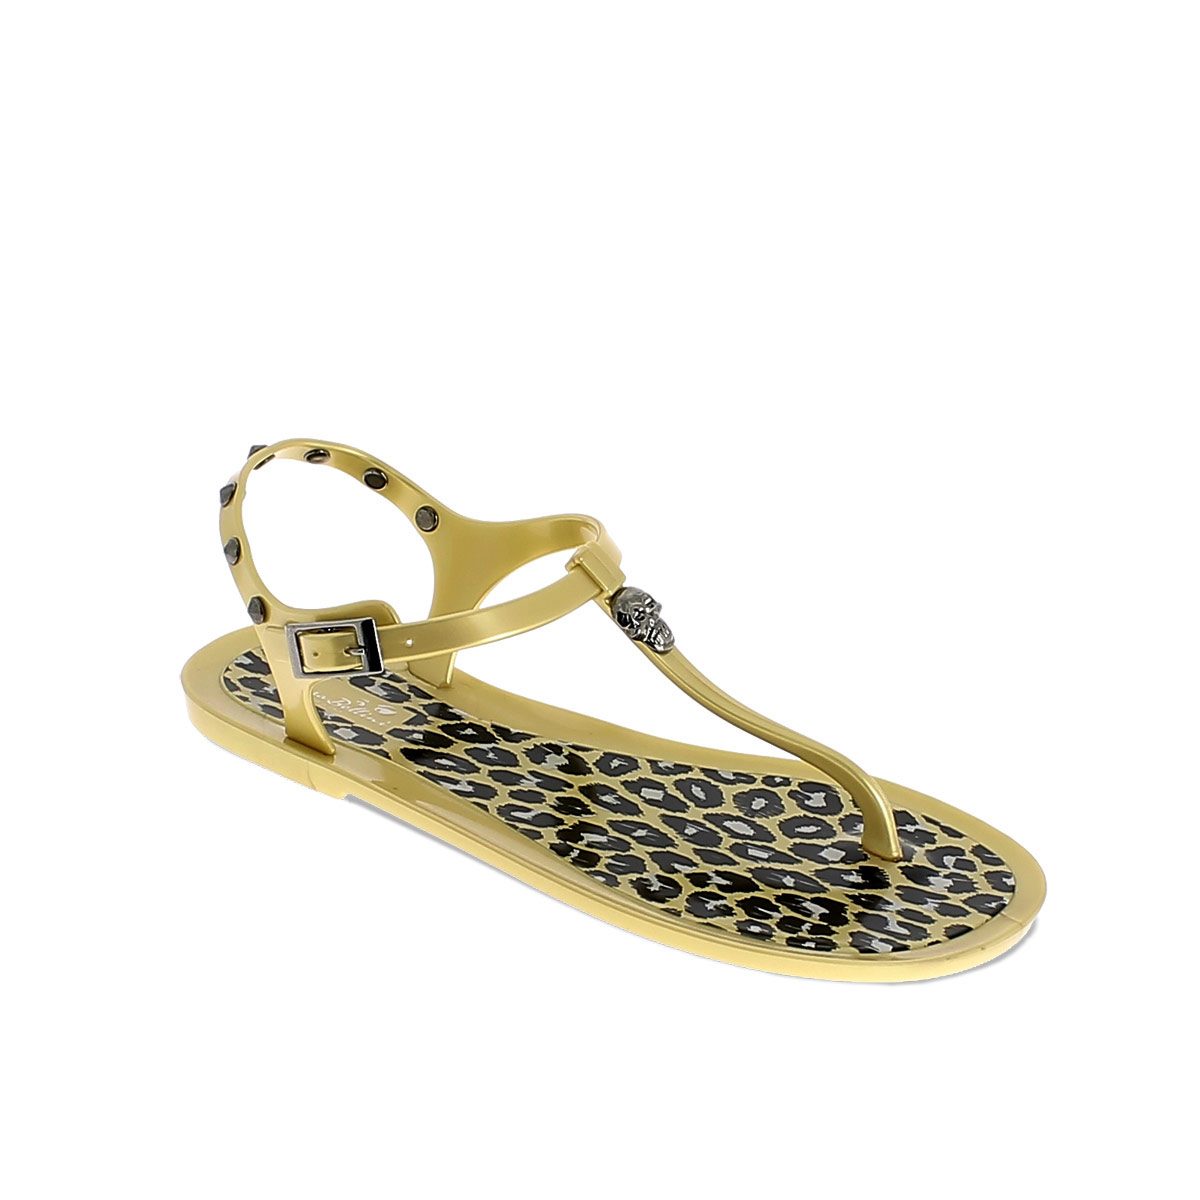 PVC THONG SANDAL WITH LEOPARD PATTERN INSOLE